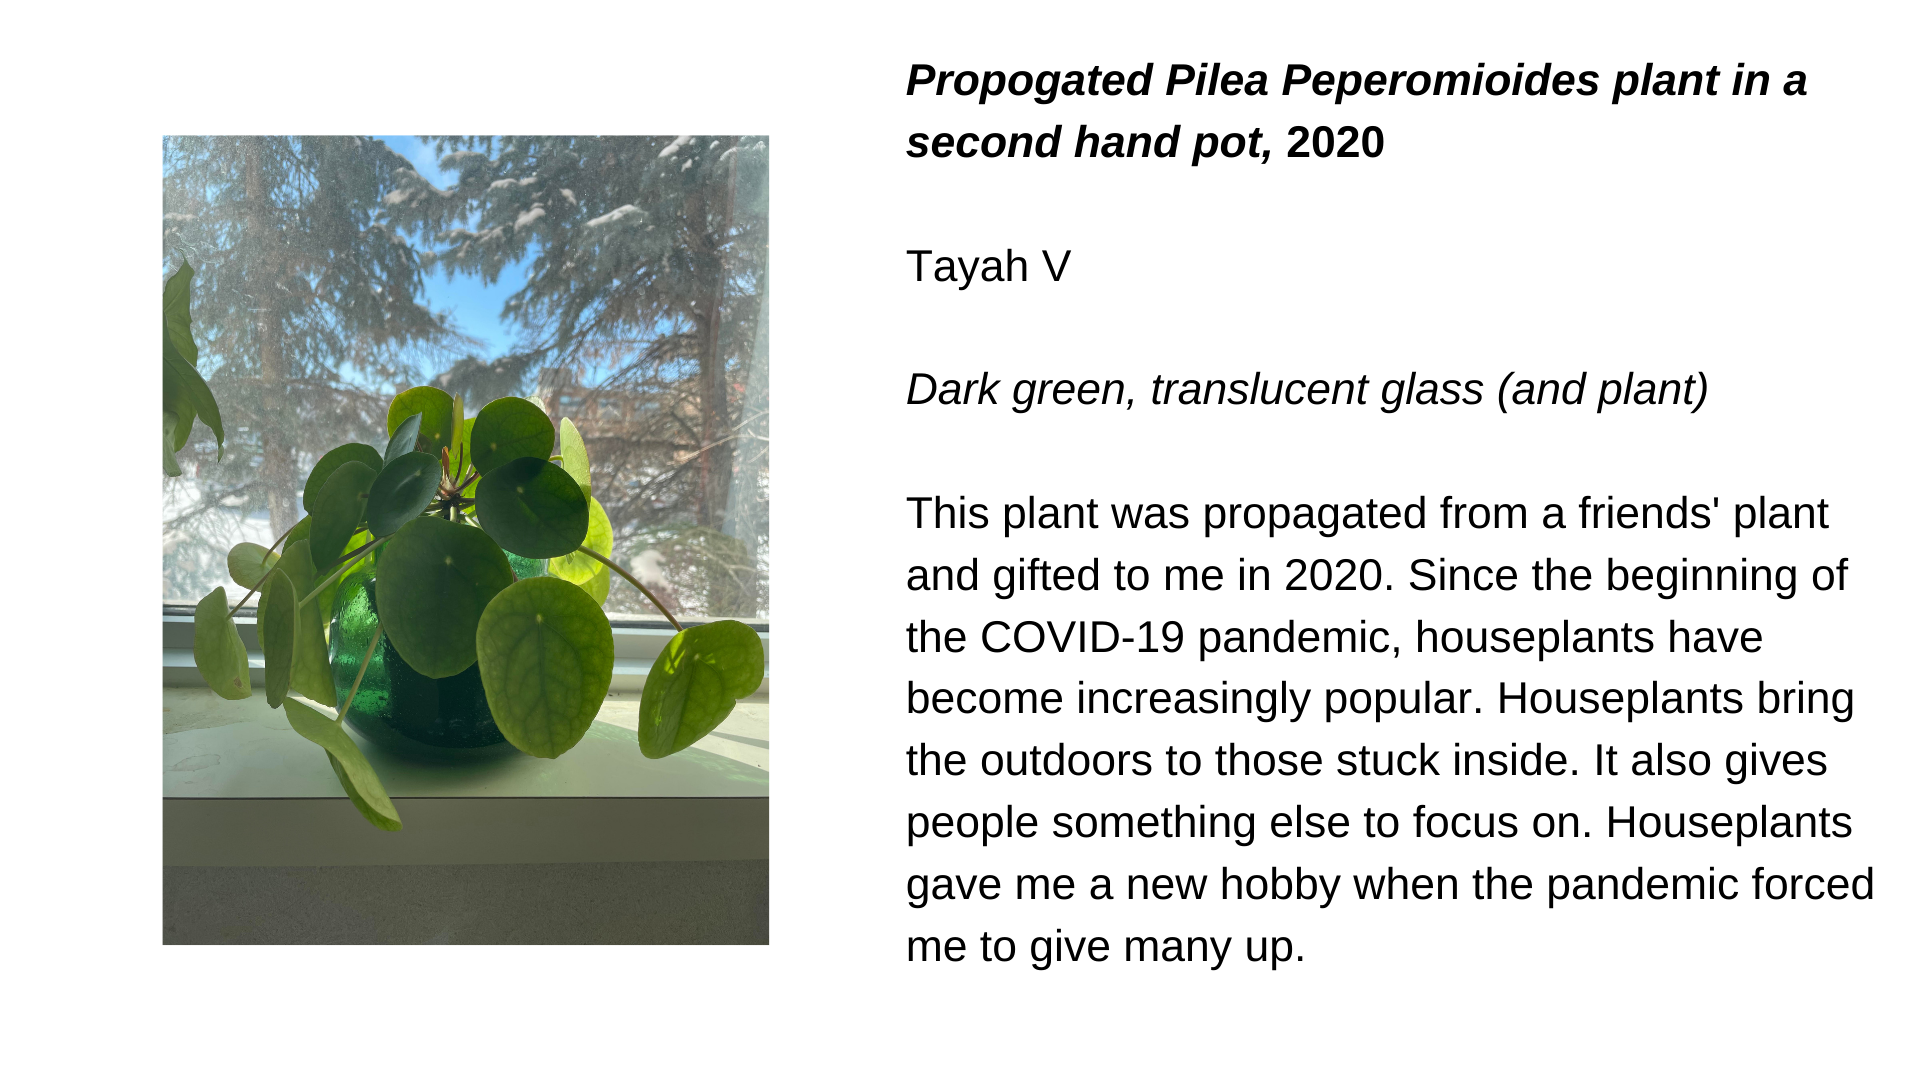  A plant with round, green leaves. Next to this image is the text, “Propogated Pilea Peperomioides plant in a second hand pot, 2020 - Tayah V. Dark green, translucent glass (and plant). This plant was propagated from a friends' plant and gifted to me